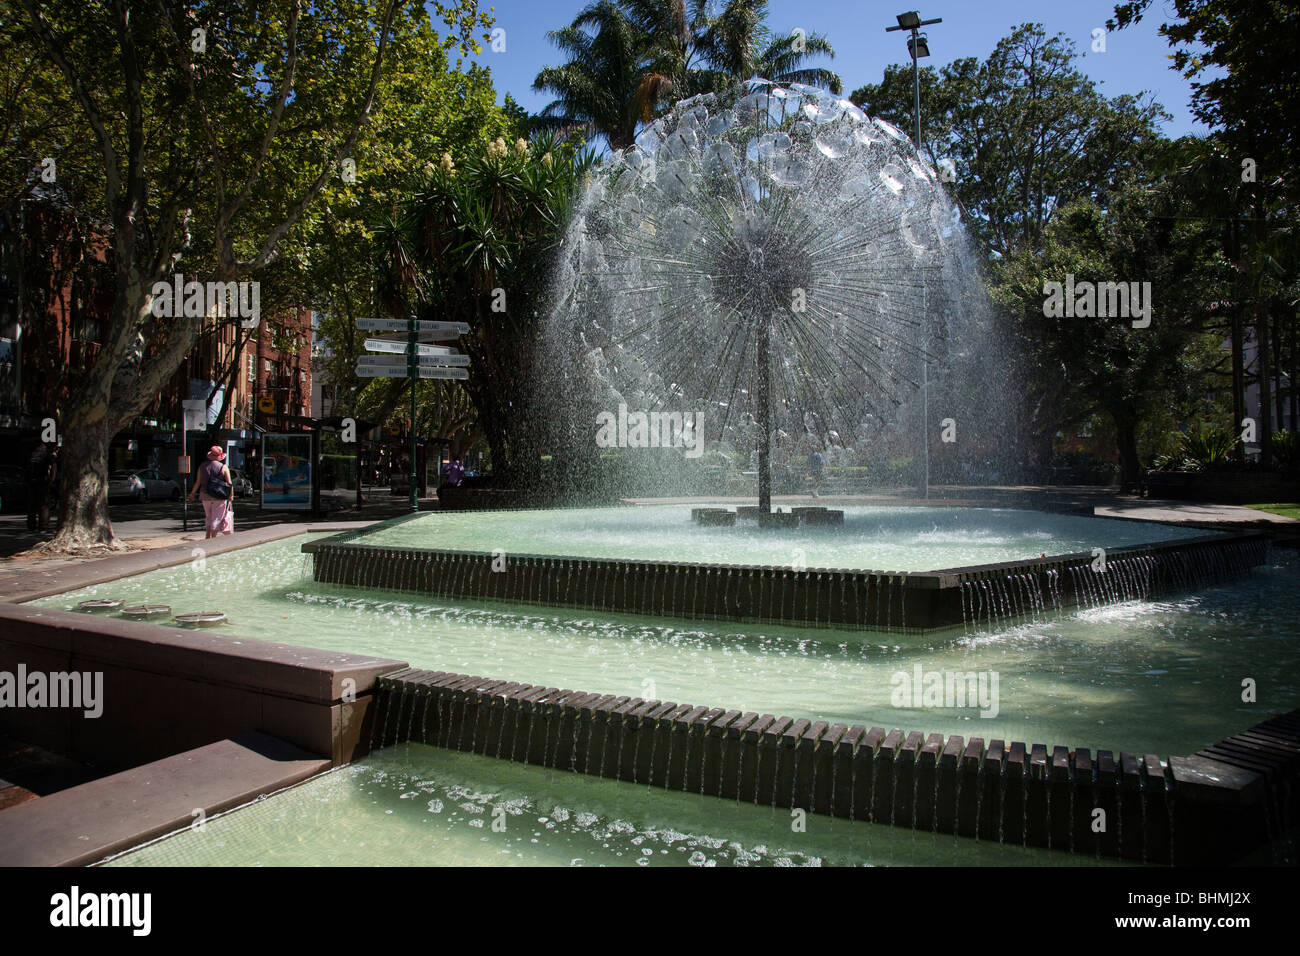 The famous El Alamein memorial fountain on the corner of Macleay Street and Darlinghurst Road, Kings Cross,Sydney Australia Stock Photo